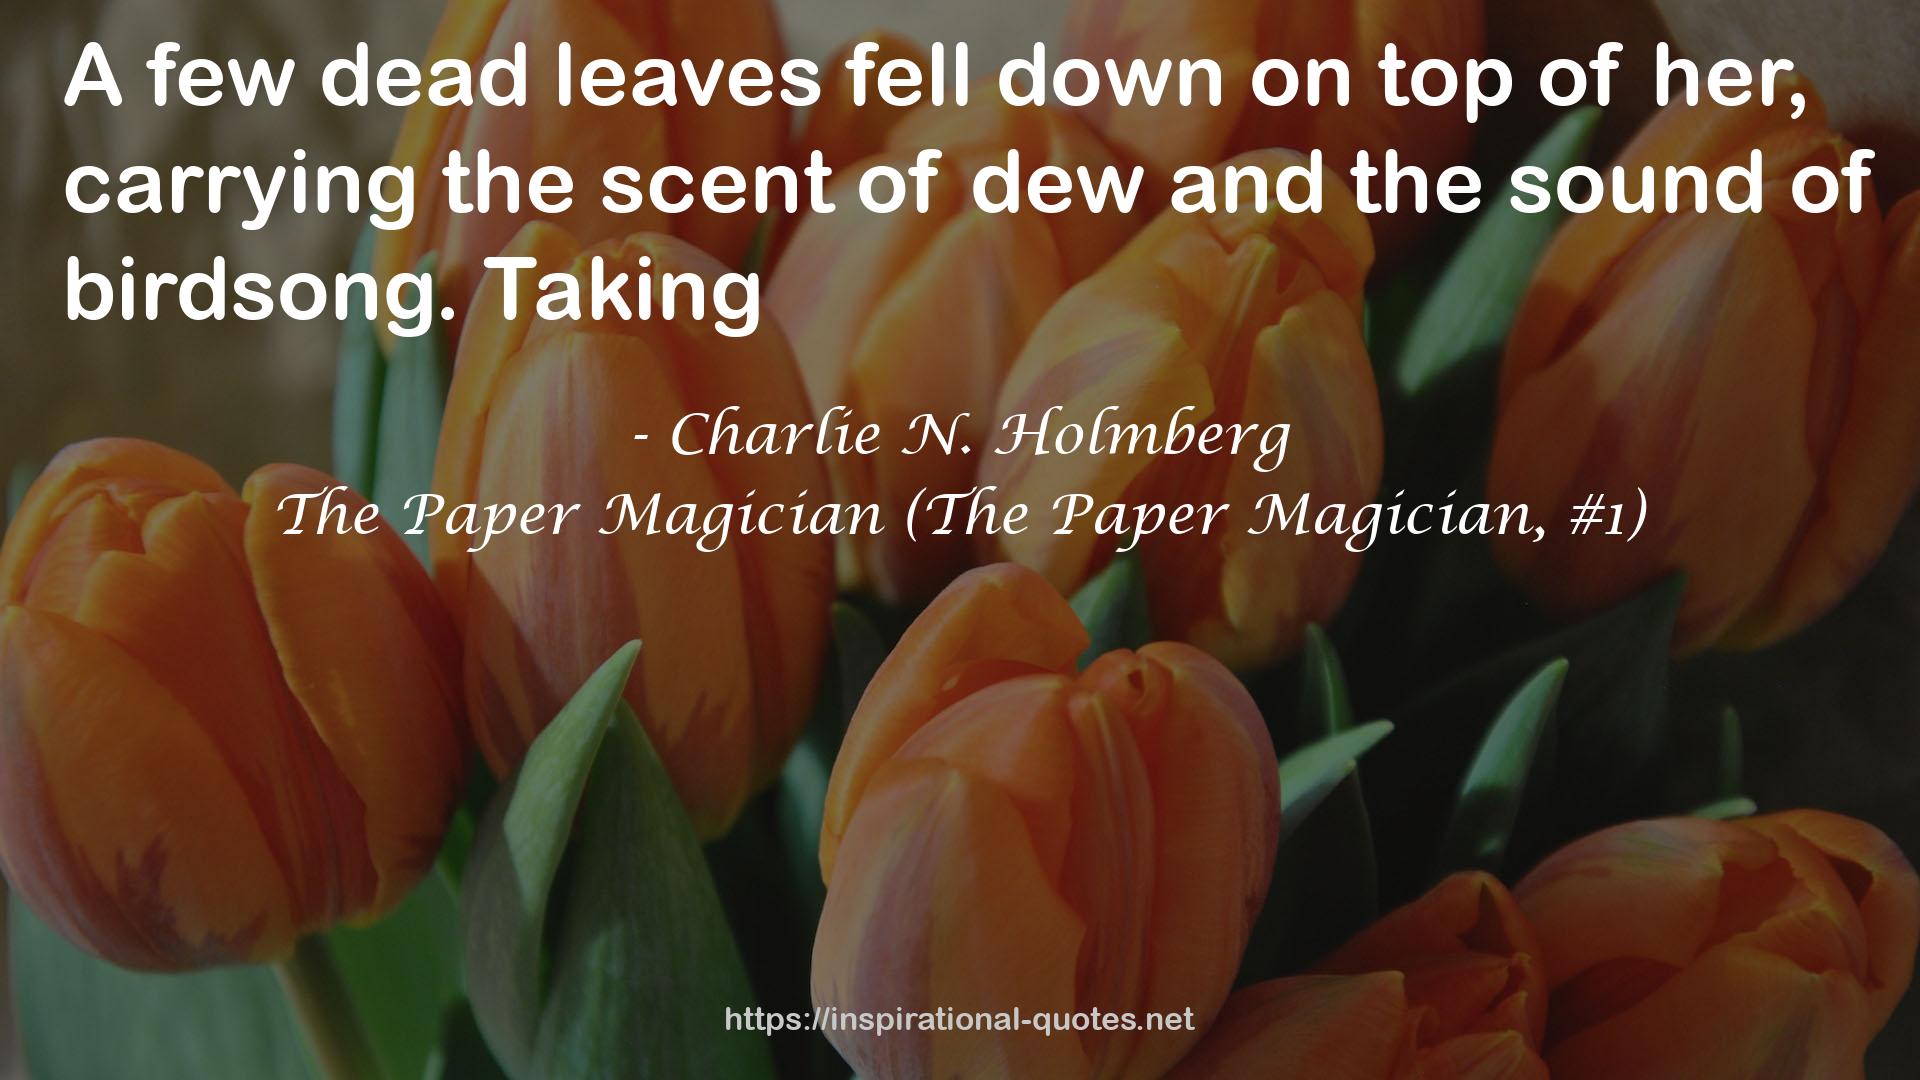 The Paper Magician (The Paper Magician, #1) QUOTES